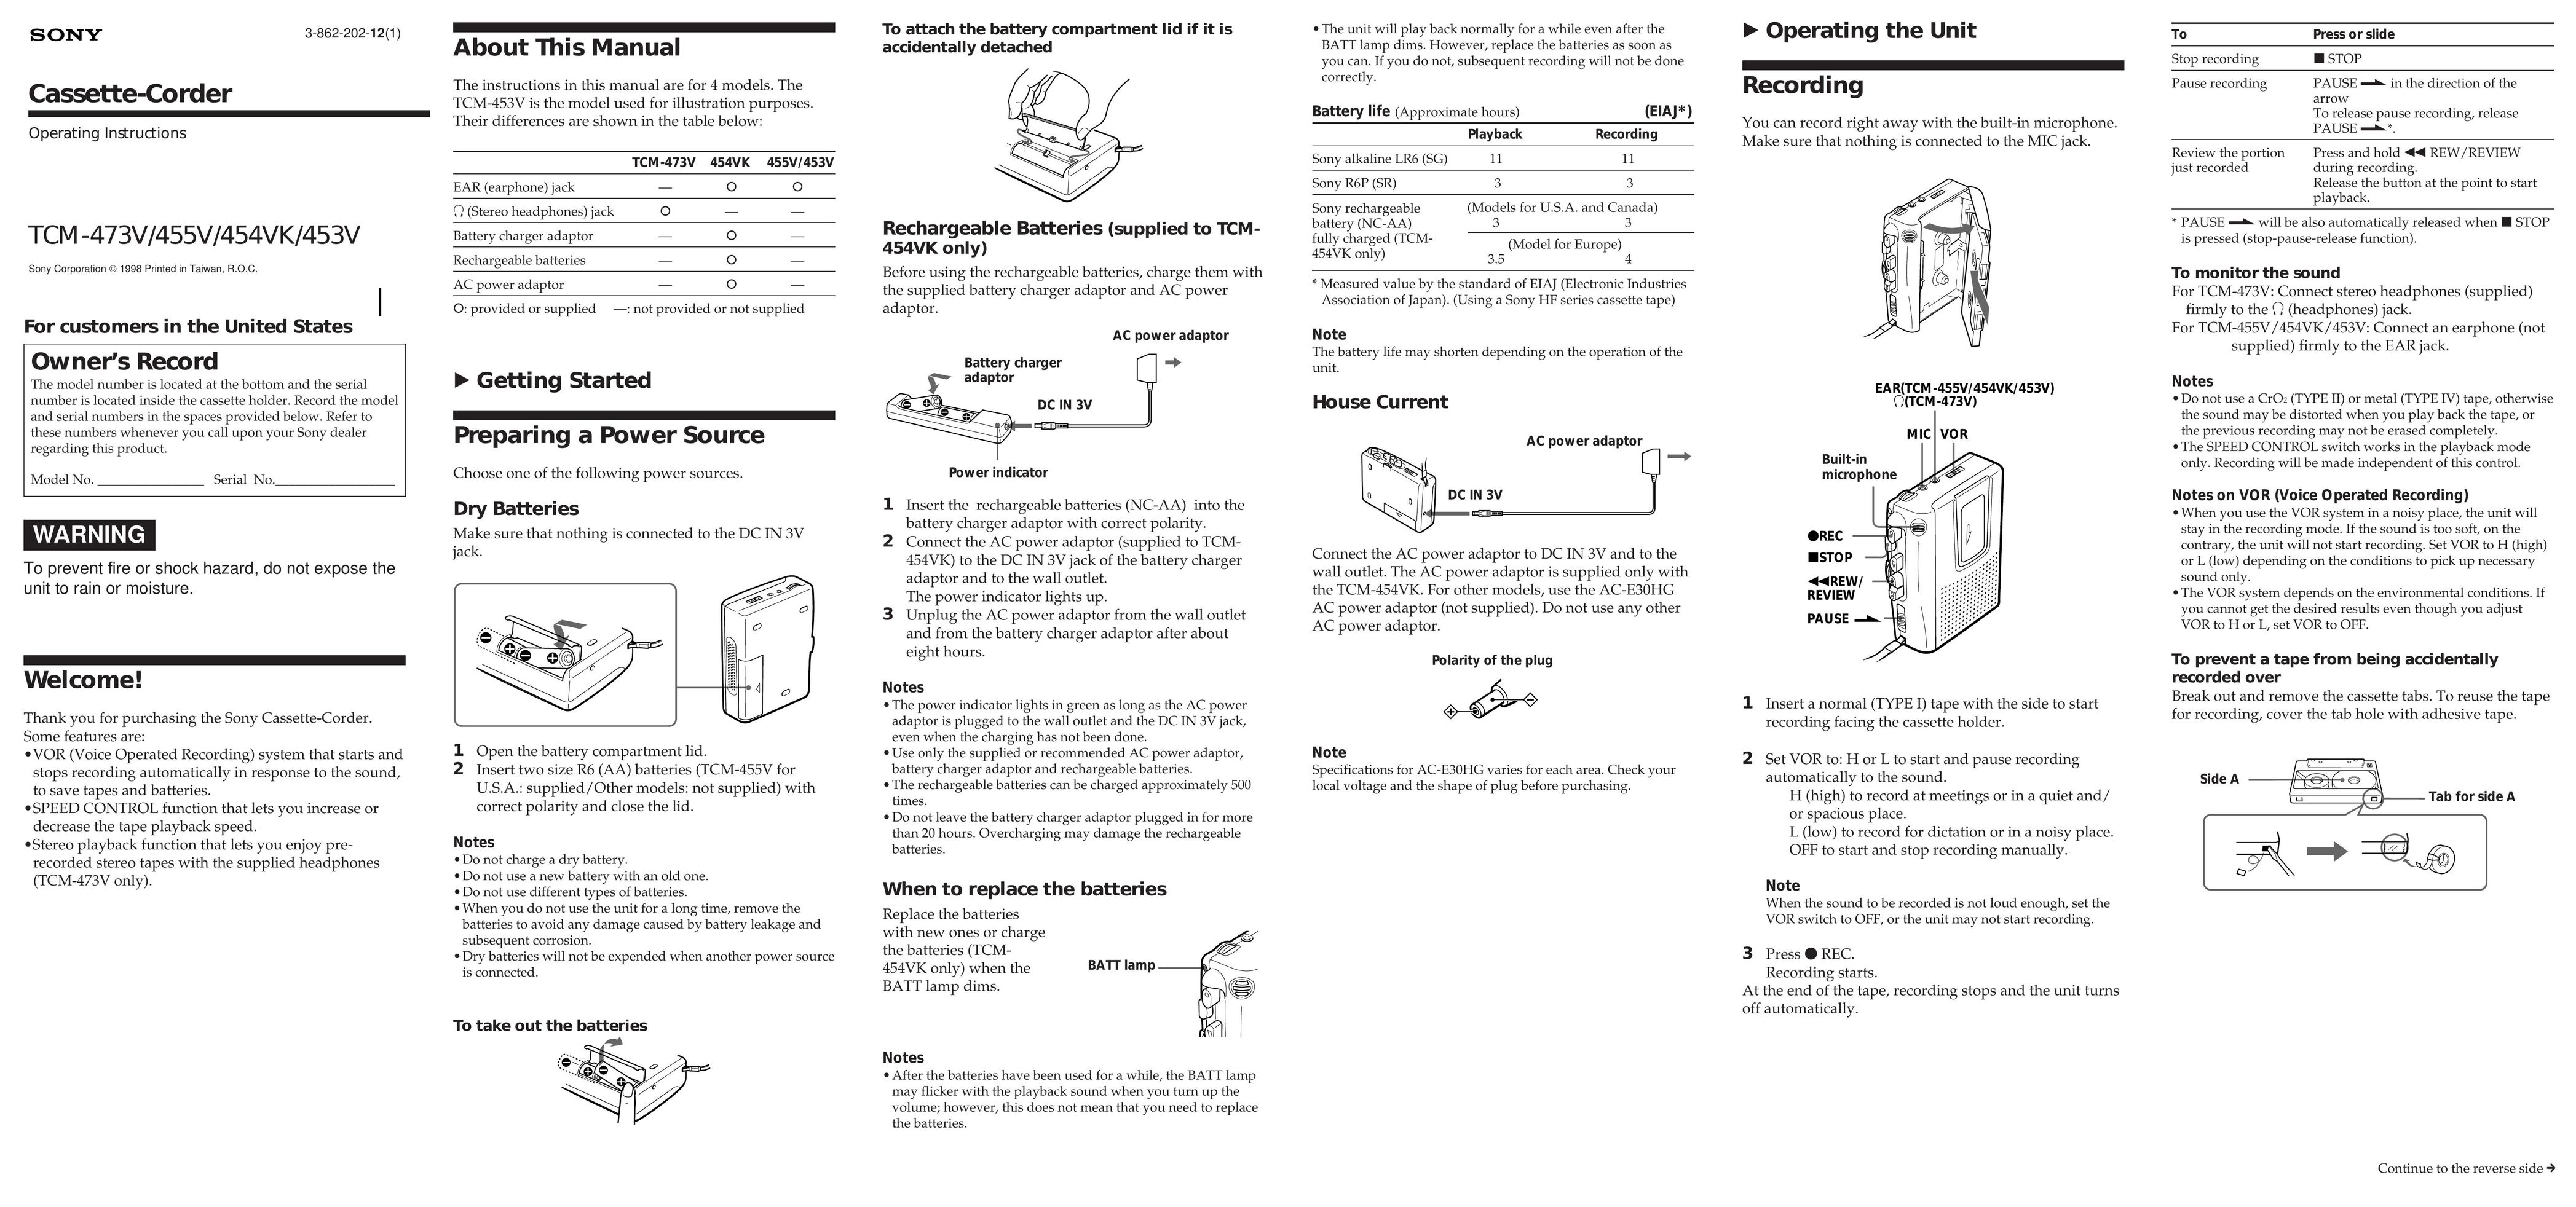 Sony 454VK Cassette Player User Manual (Page 1)